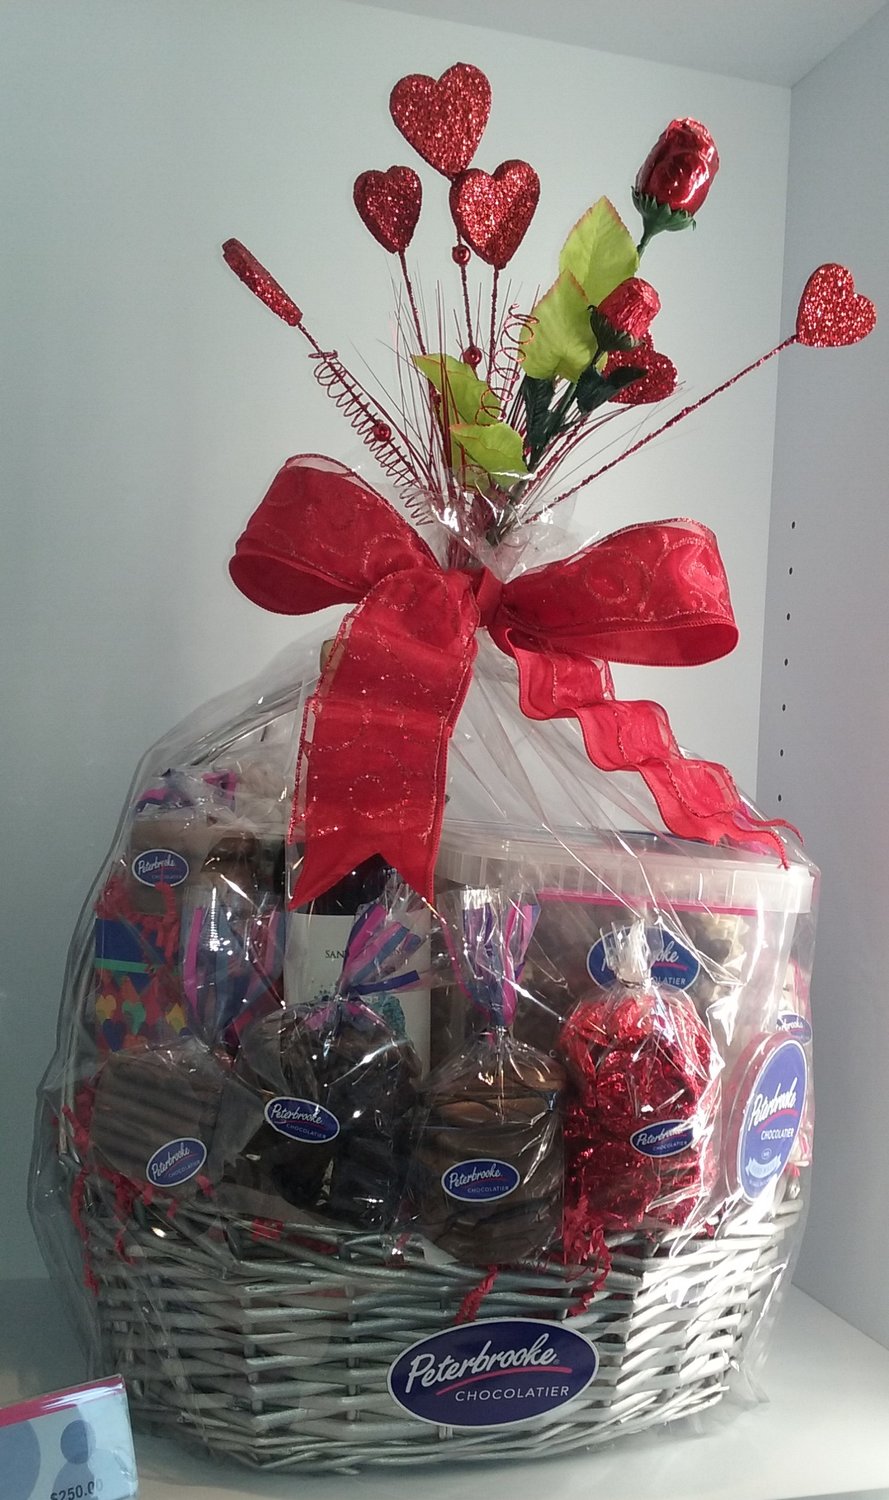 Among the many ways Peterbrooke Chocolatier has to express love are treat-filled baskets.